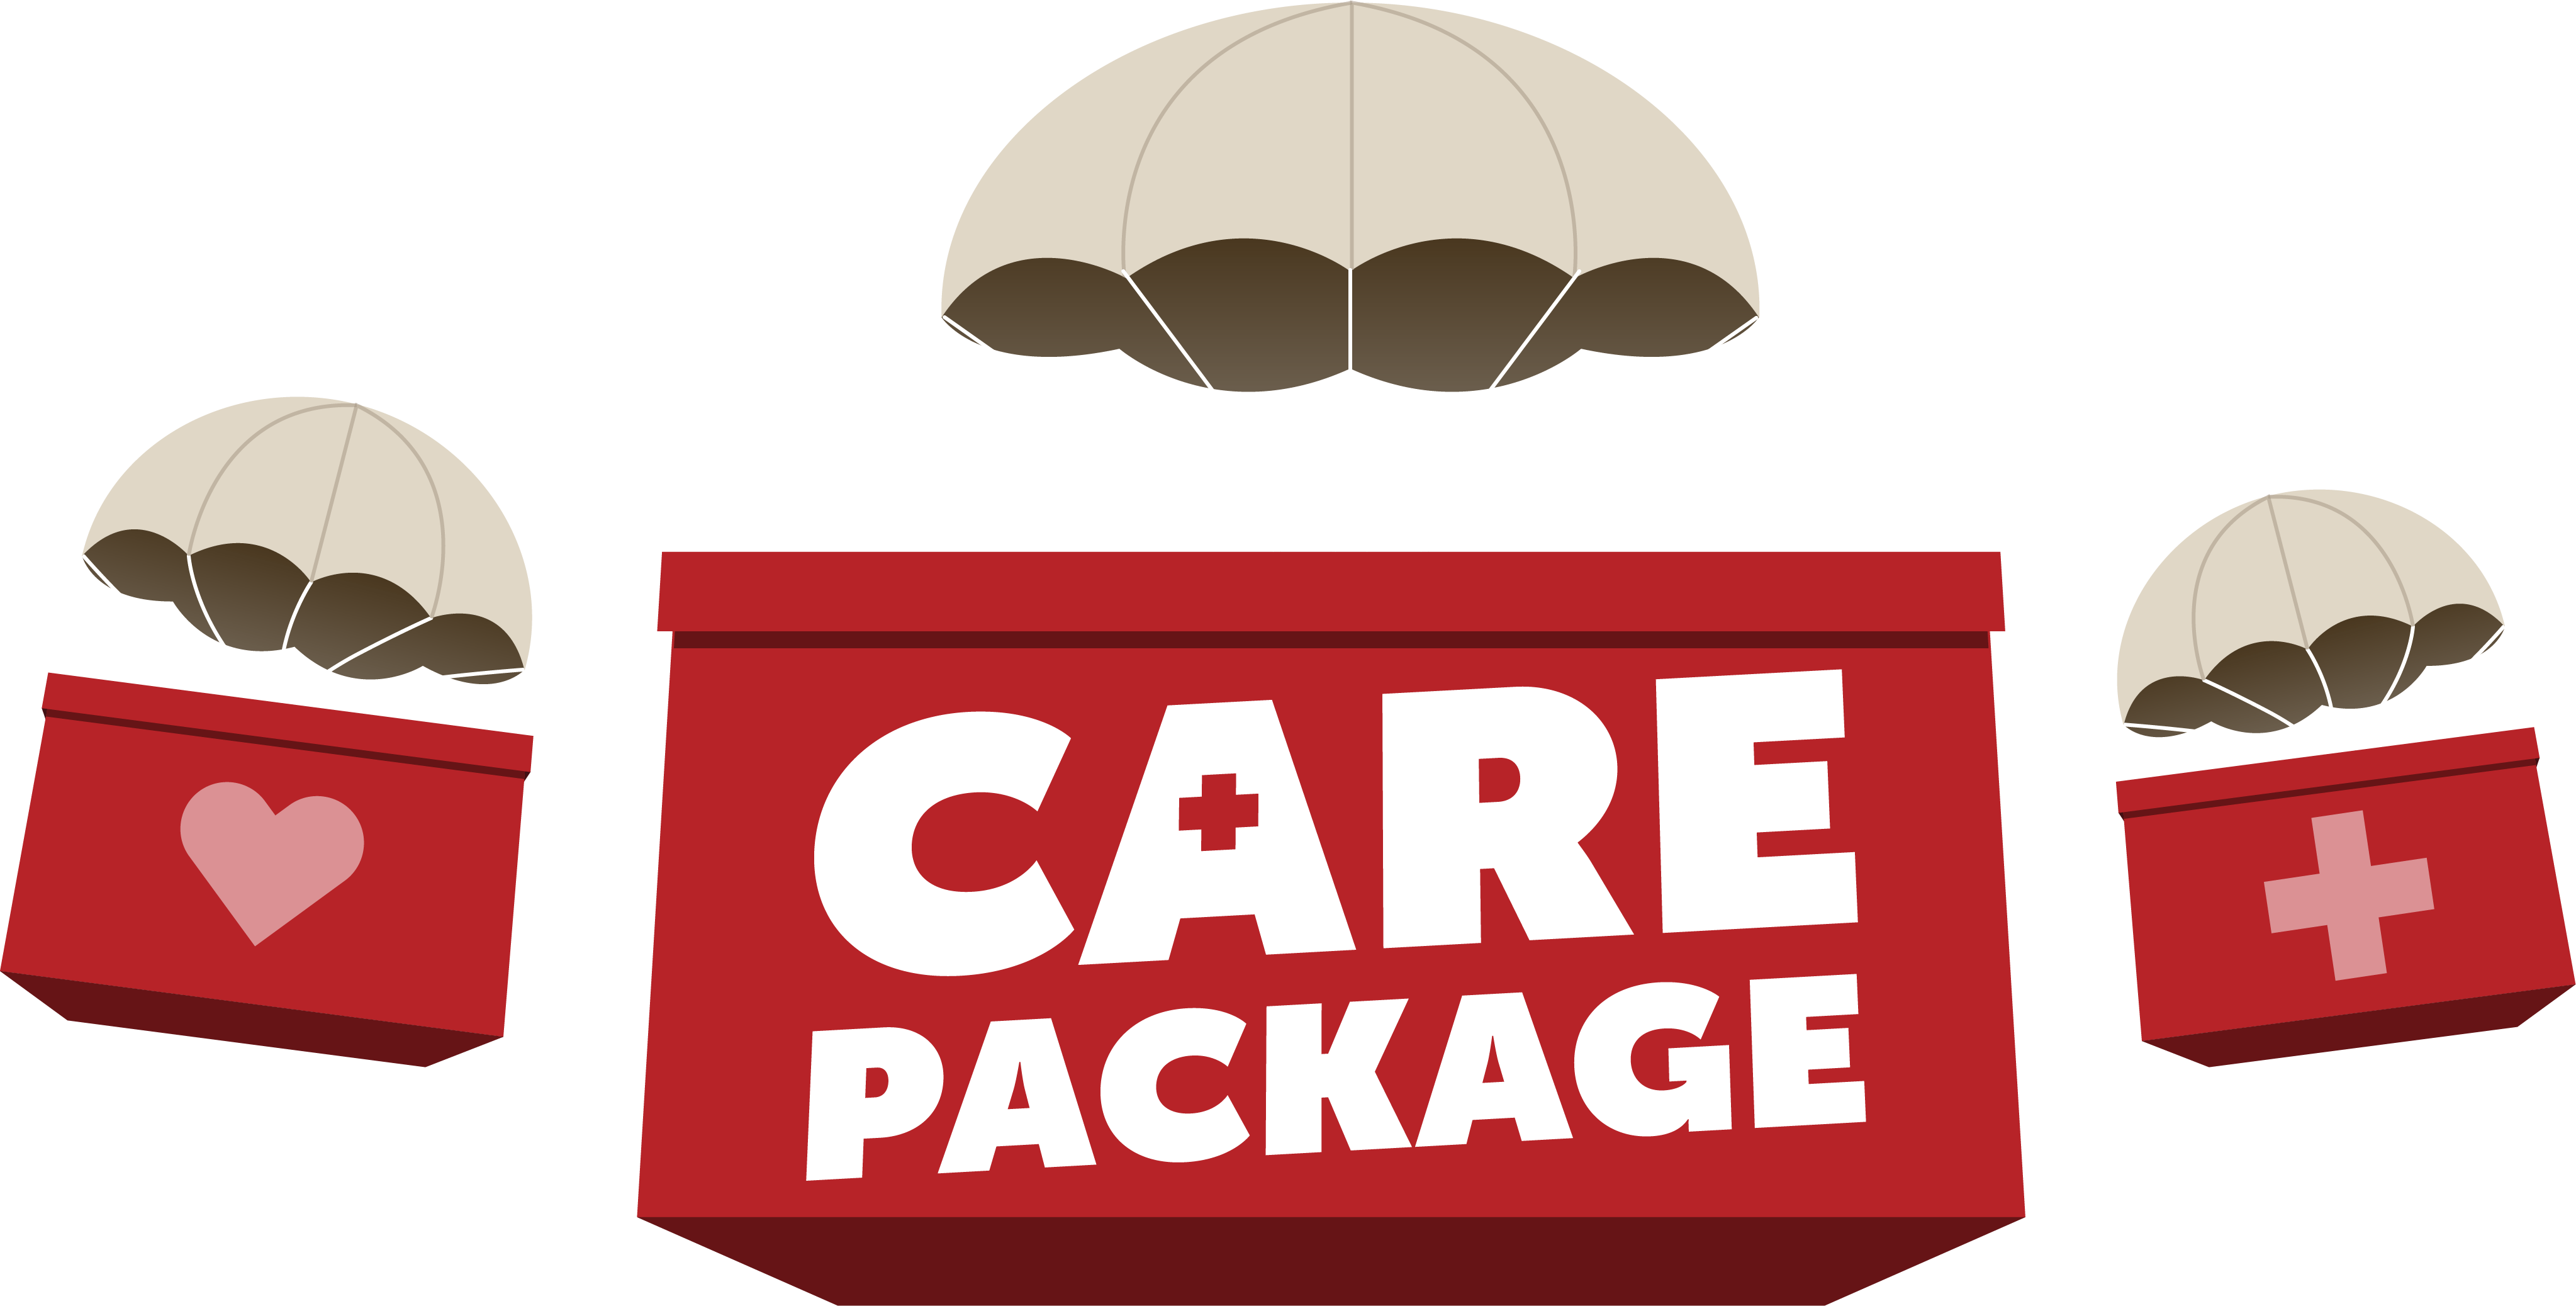 Humble Care Package Bundle